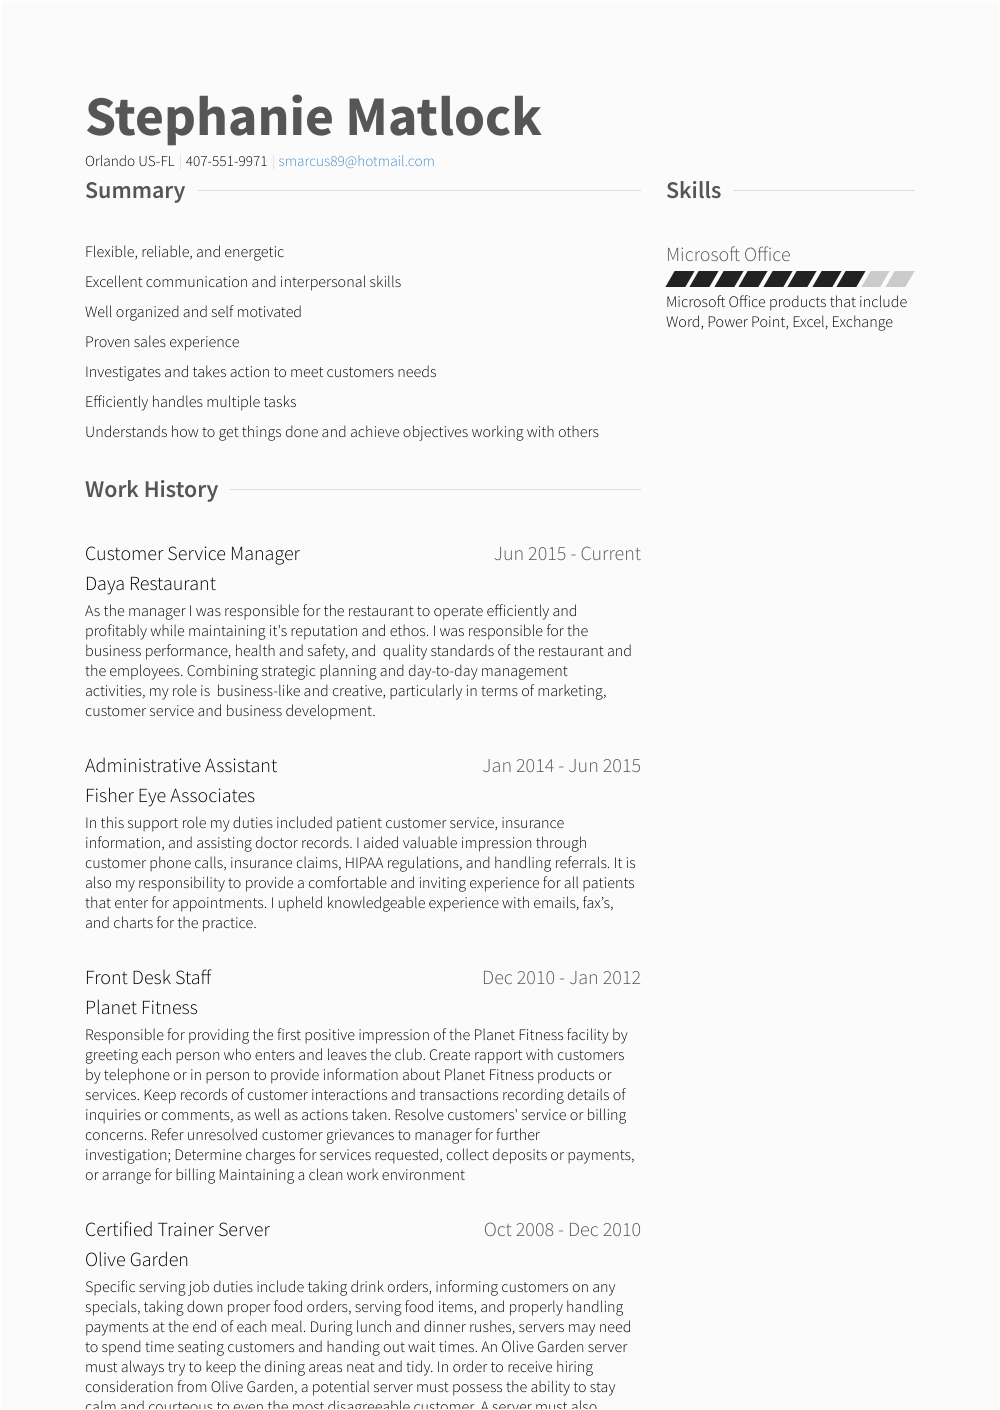 Resume Profile Samples for Stay at Home Moms Stay at Home Mom Resume Samples and Templates